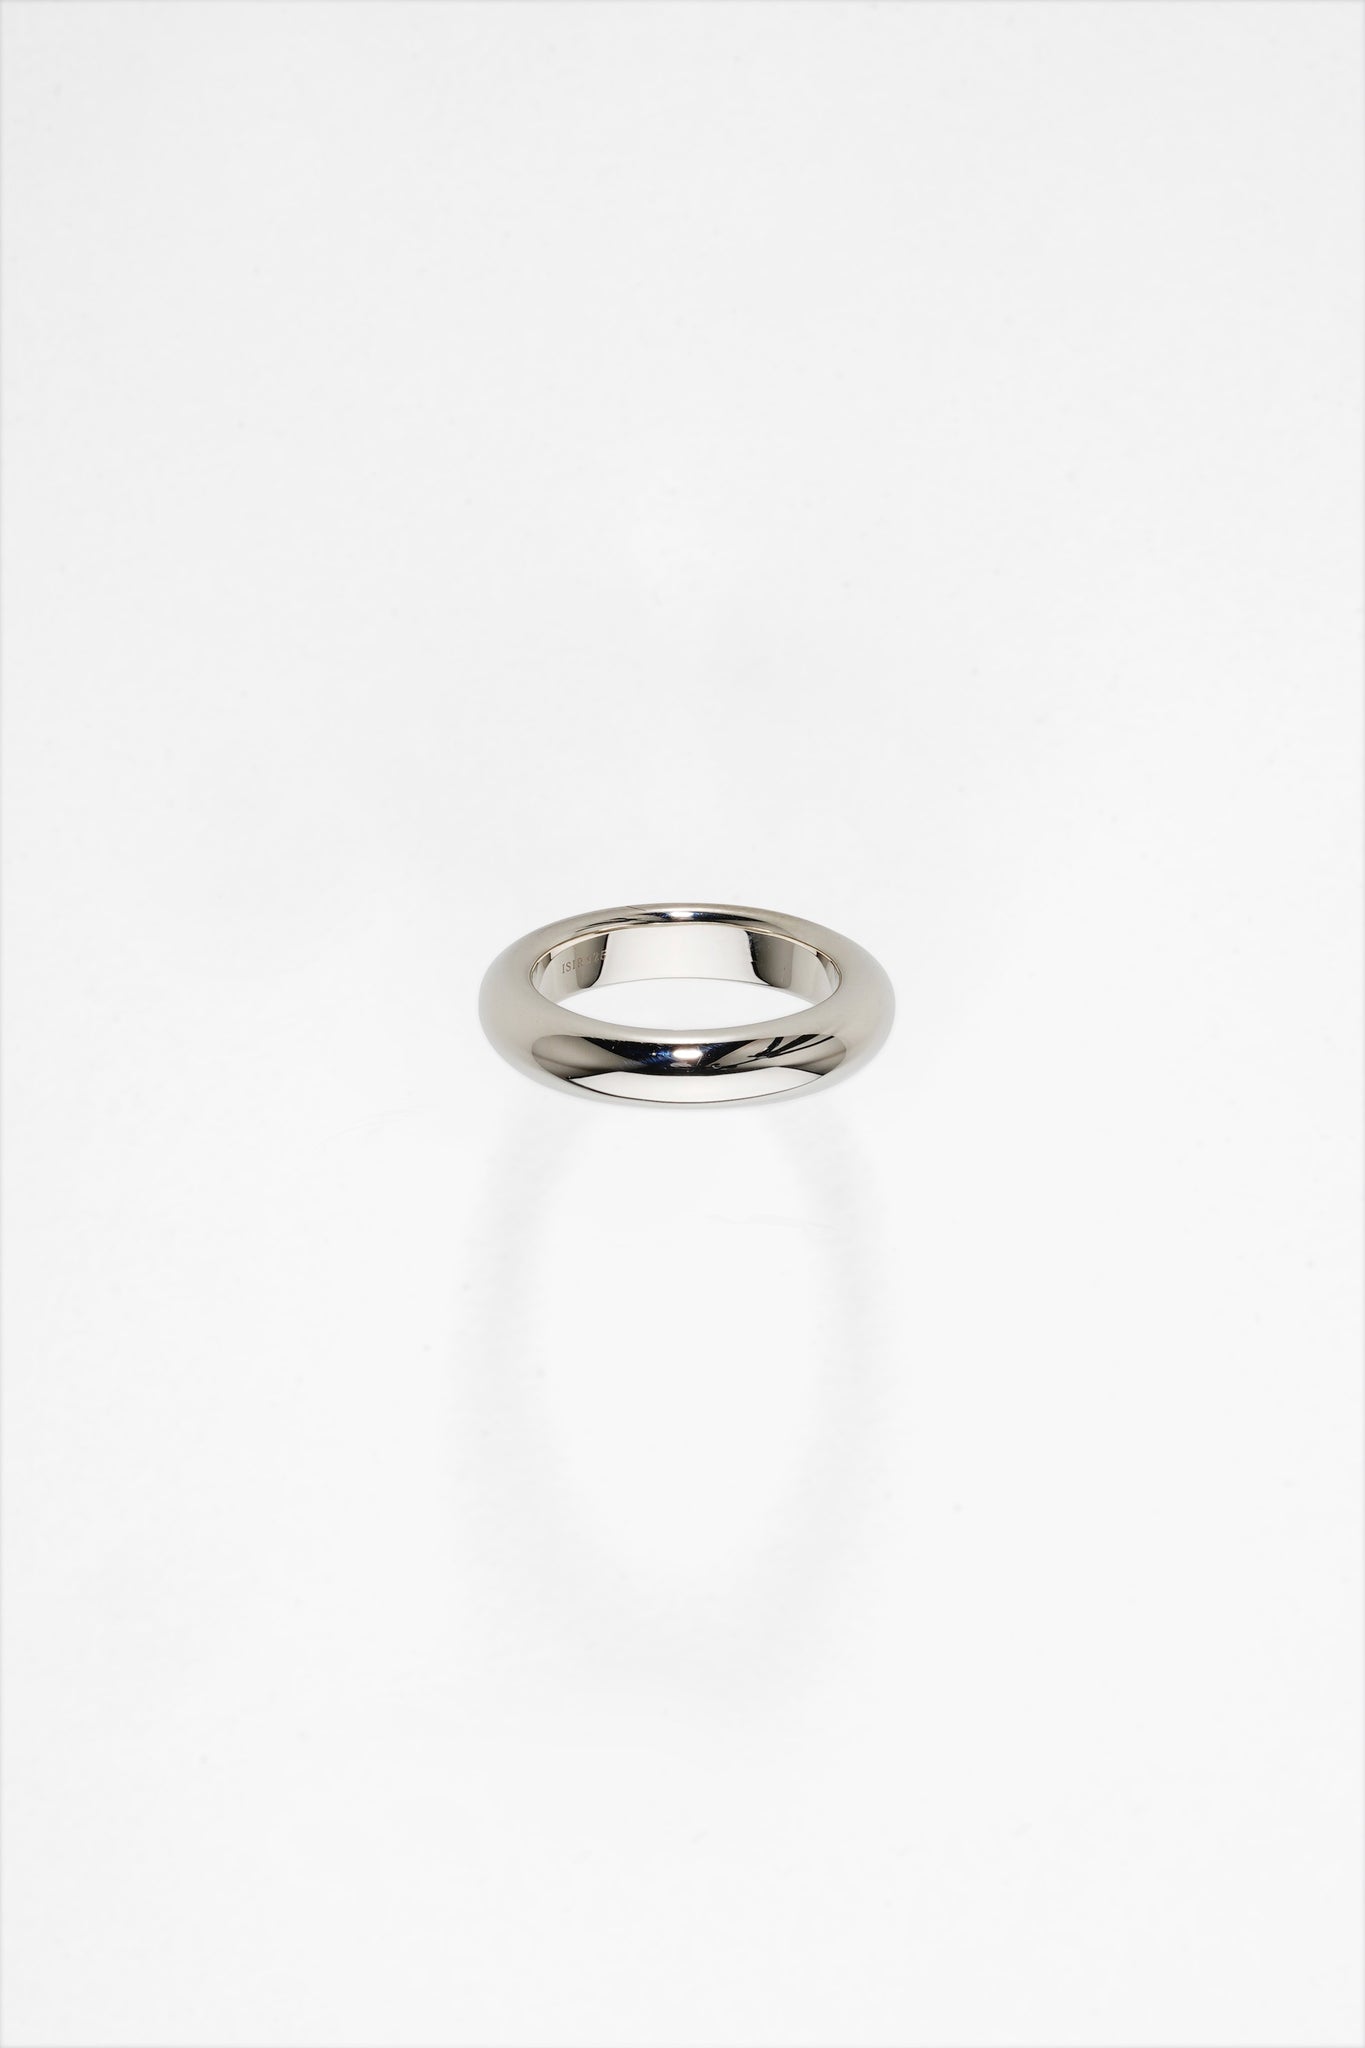 IN RING 4mm (SILVER925)